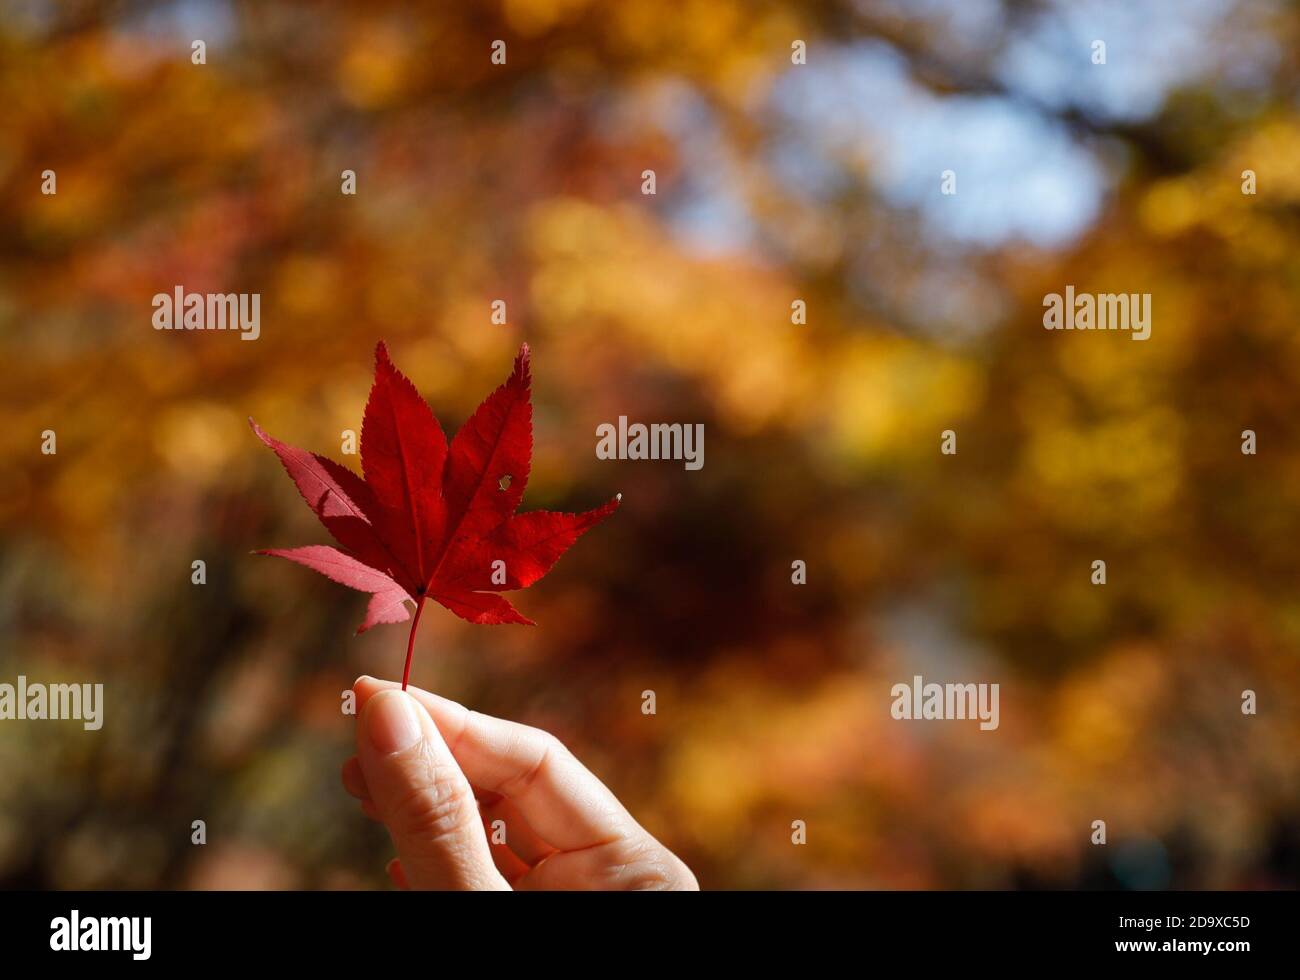 Jeongeup. 8th Nov, 2020. Photo taken on Nov. 8, 2020 shows maple leaves at Naejangsan National Park in Jeongeup City of North Jeolla Province, South Korea. Naejangsan is a popular tourist destination in South Korea, particularly in autumn due to its spectacular maple scenery. Credit: Wang Jingqiang/Xinhua/Alamy Live News Stock Photo